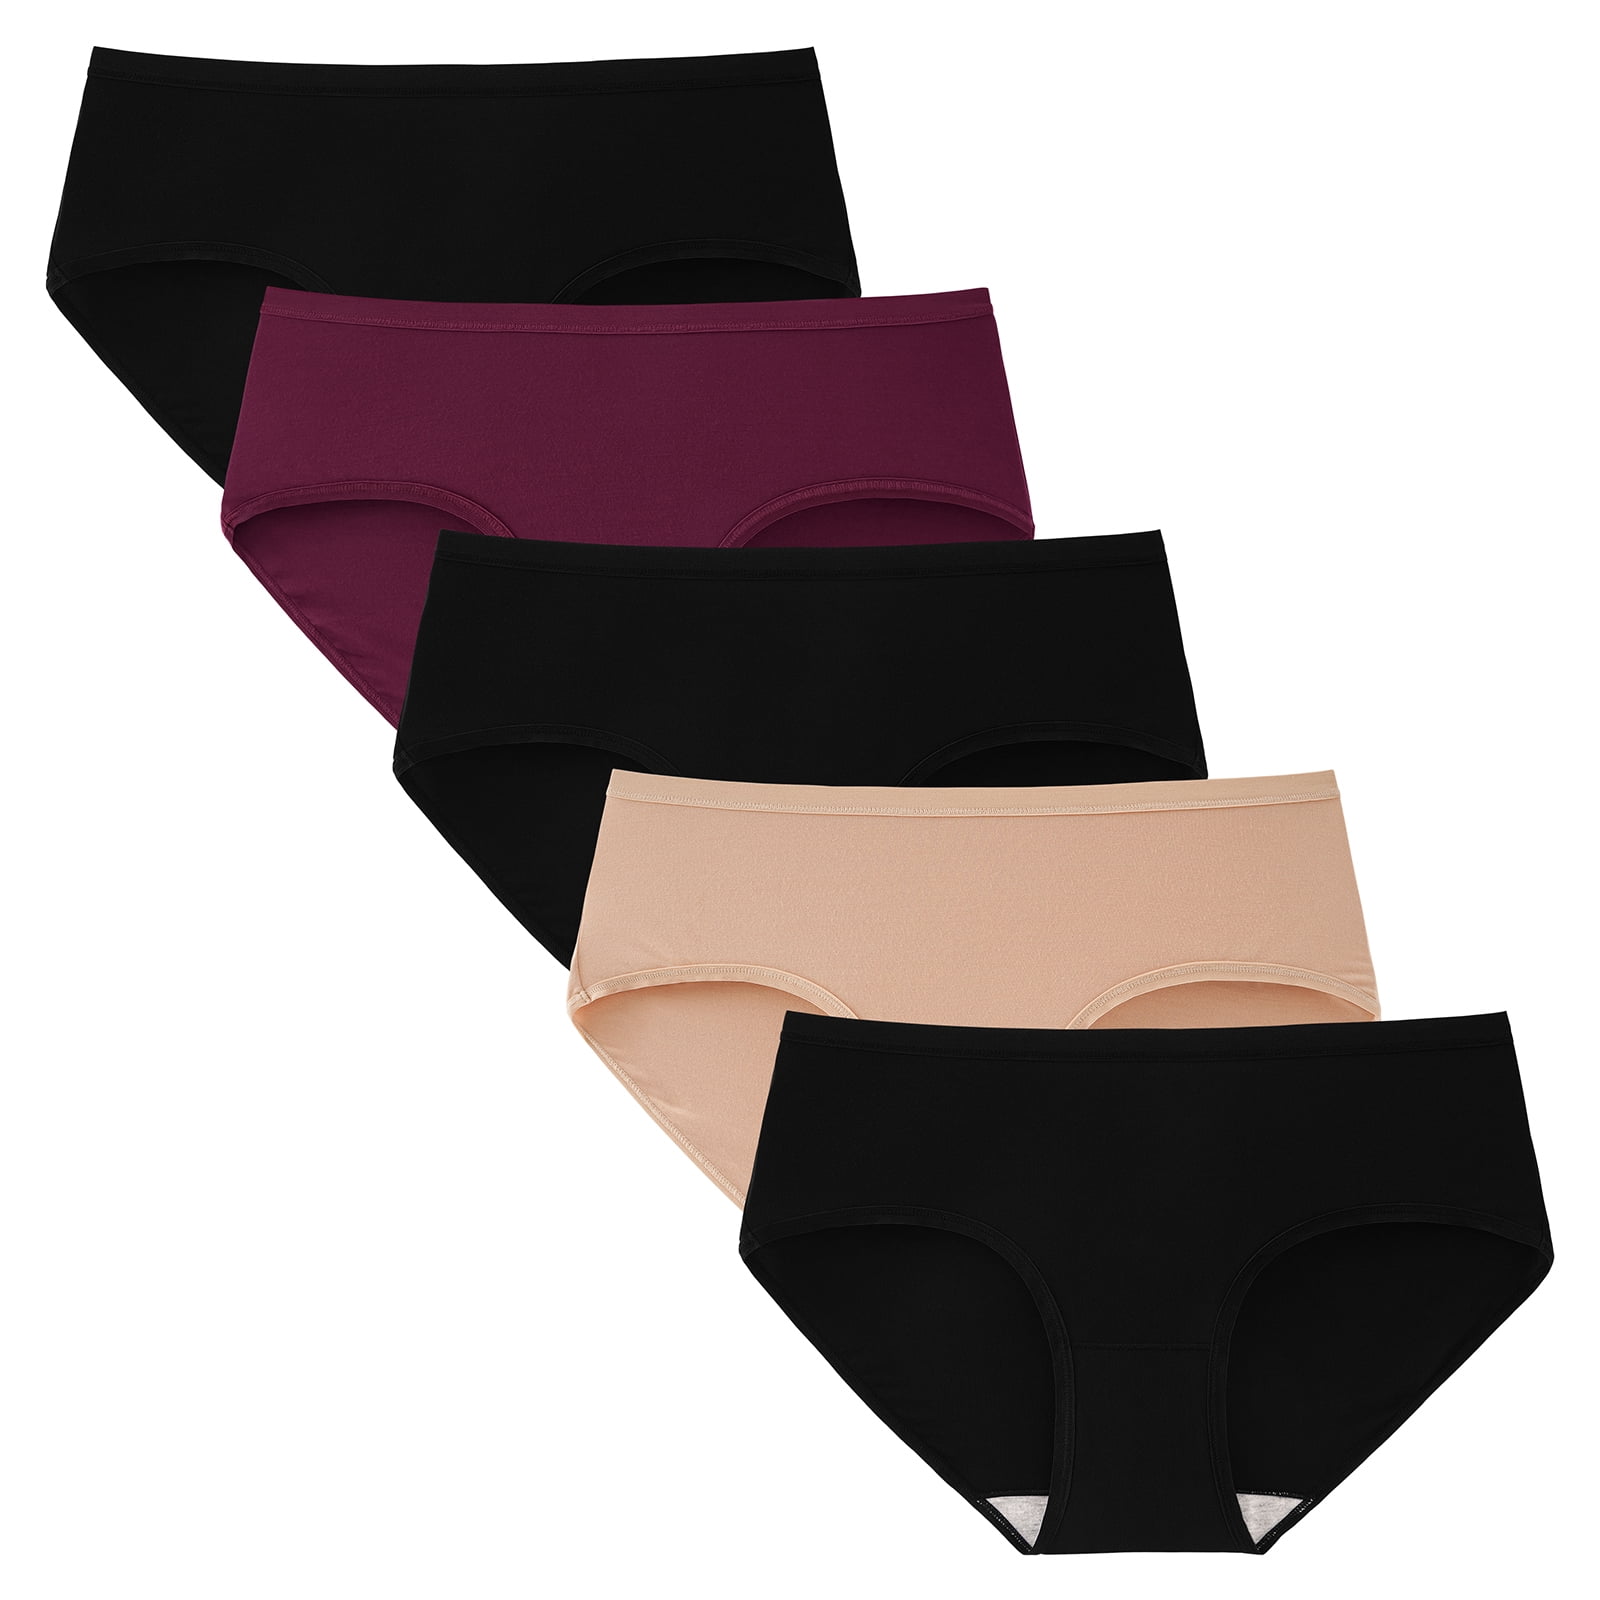 INNERSY Womens Underwear Micro Modal Soft Panties Pack of 5 (2XL, Black/Burgundy/Coffee/Bleached  Apricot/Gray Blue) 